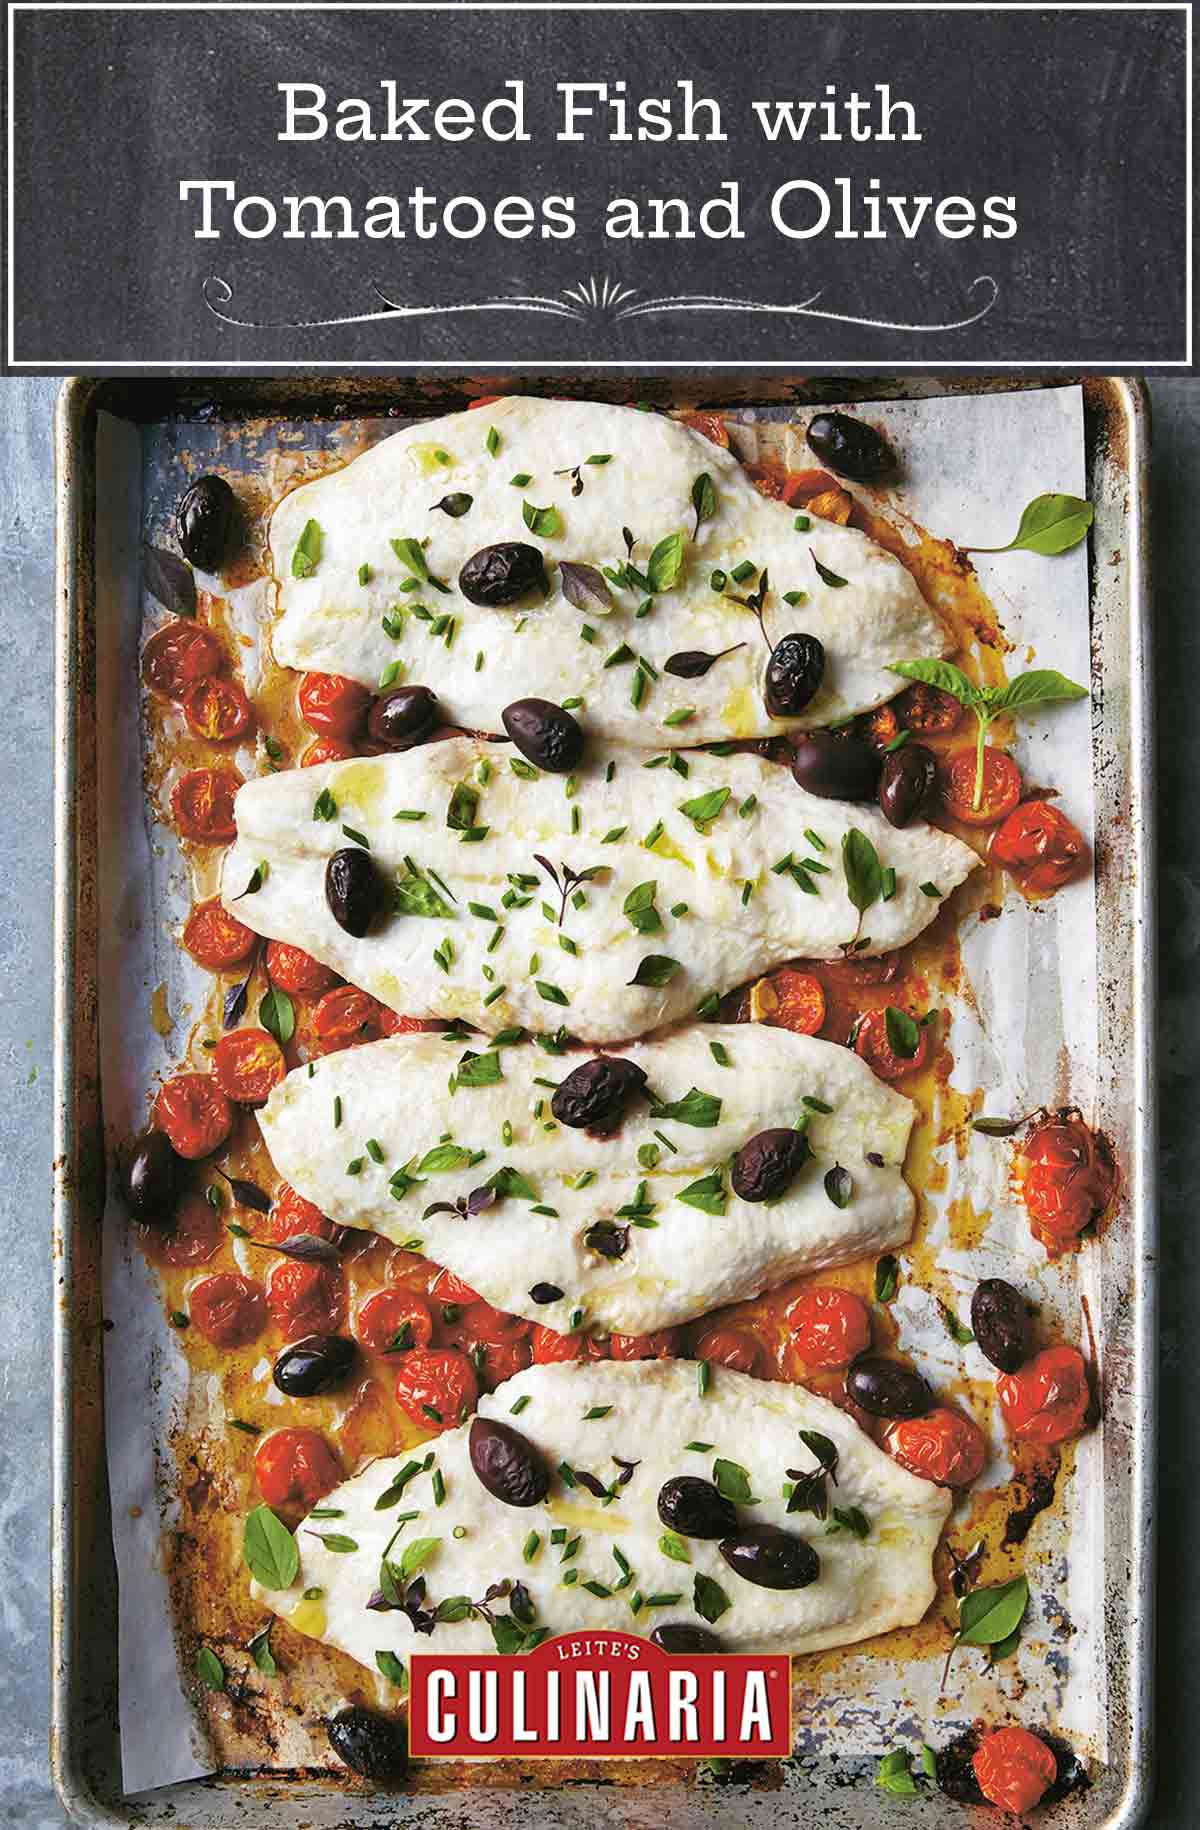 Fish fillets on a sheet pan with roasted tomatoes and black olives.